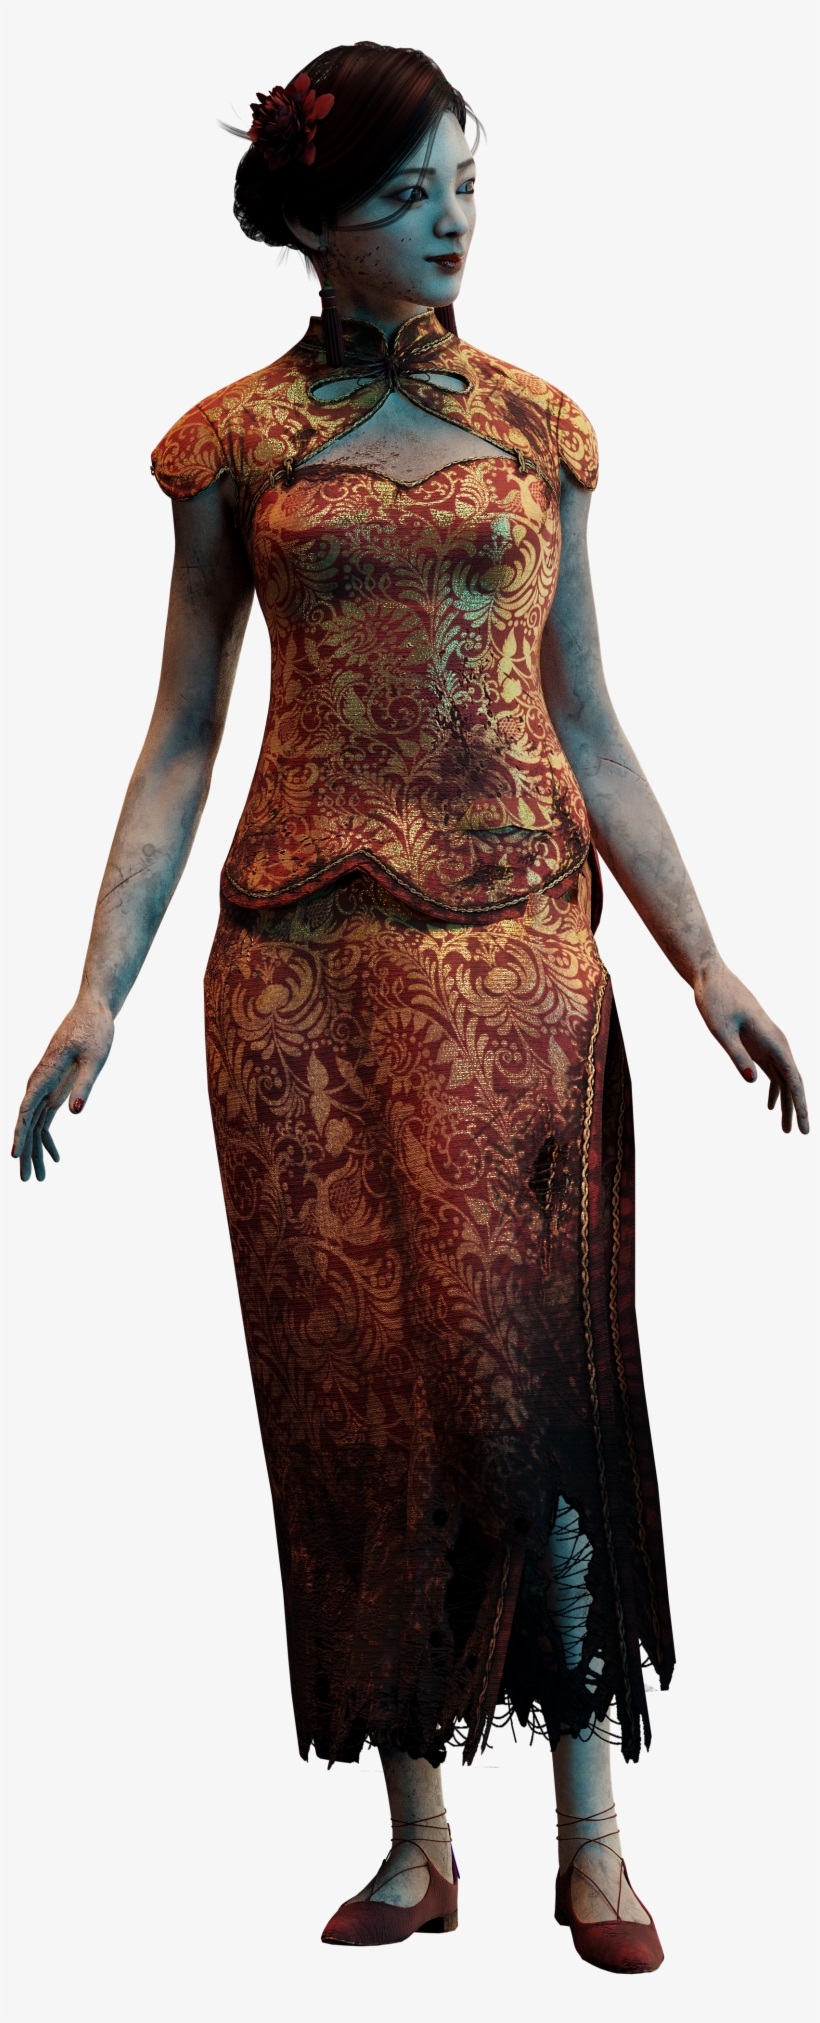 Changed Pbr For Feng Cheongsam Outfit A Little - Costume, transparent png #9316006